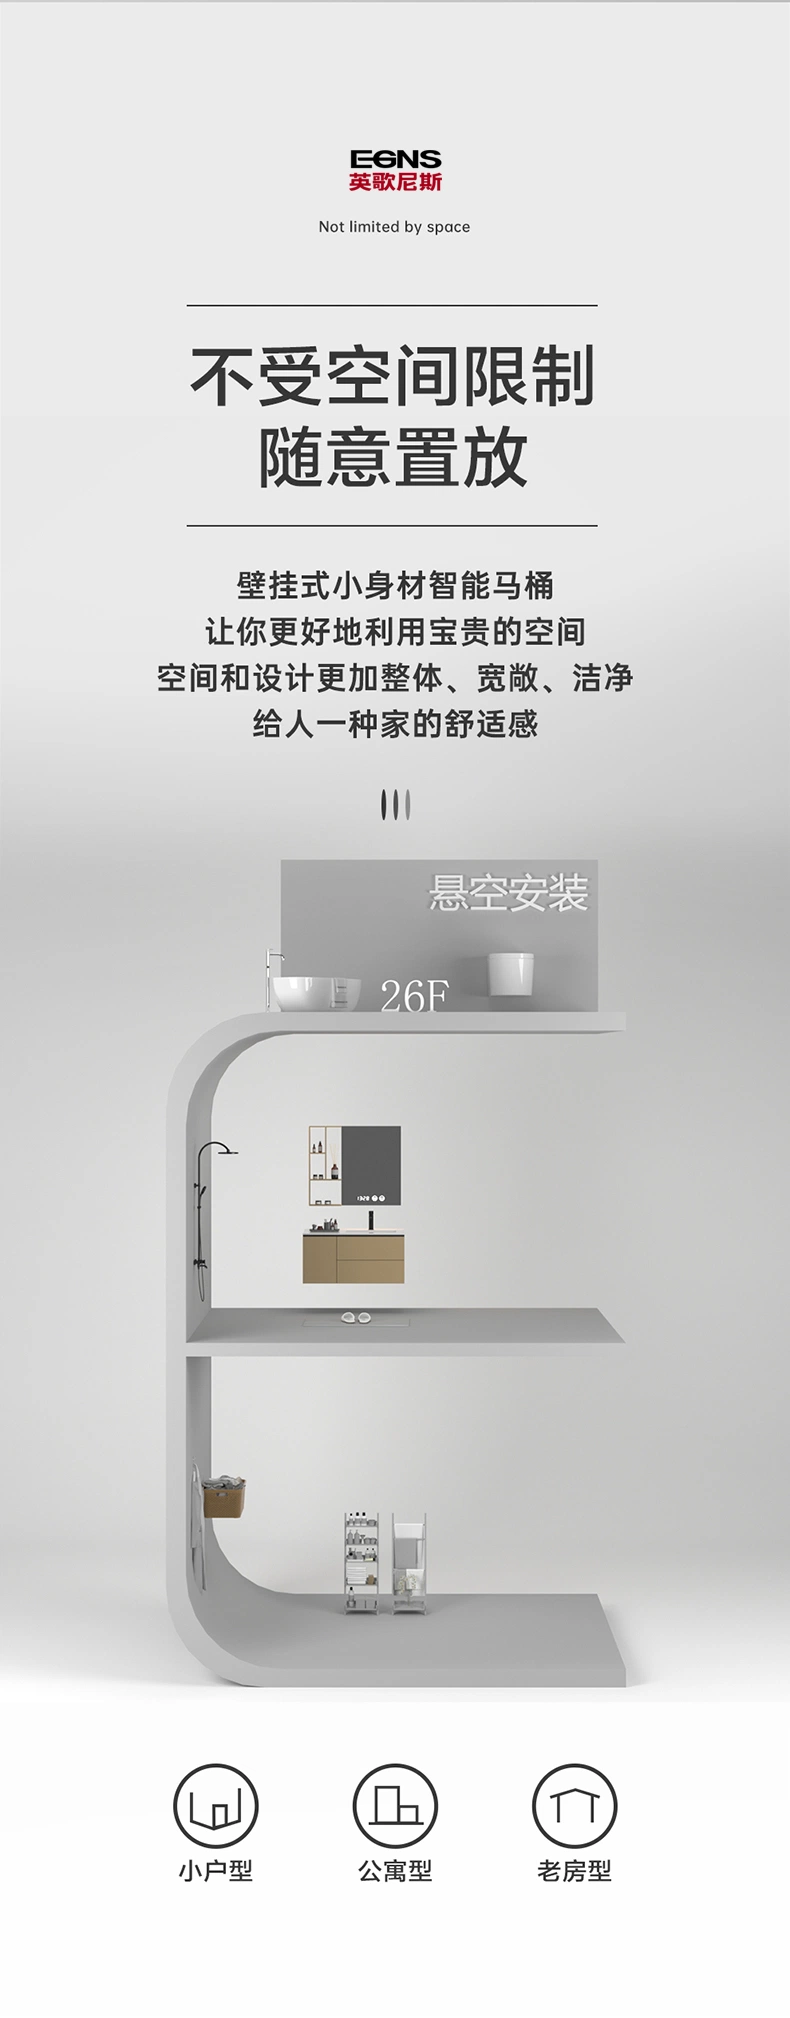 Bathroom Concealed Cistern Back to Wall Smart Wc Intelligent Wall Hung Toilet Set with Remote Control White Toilet